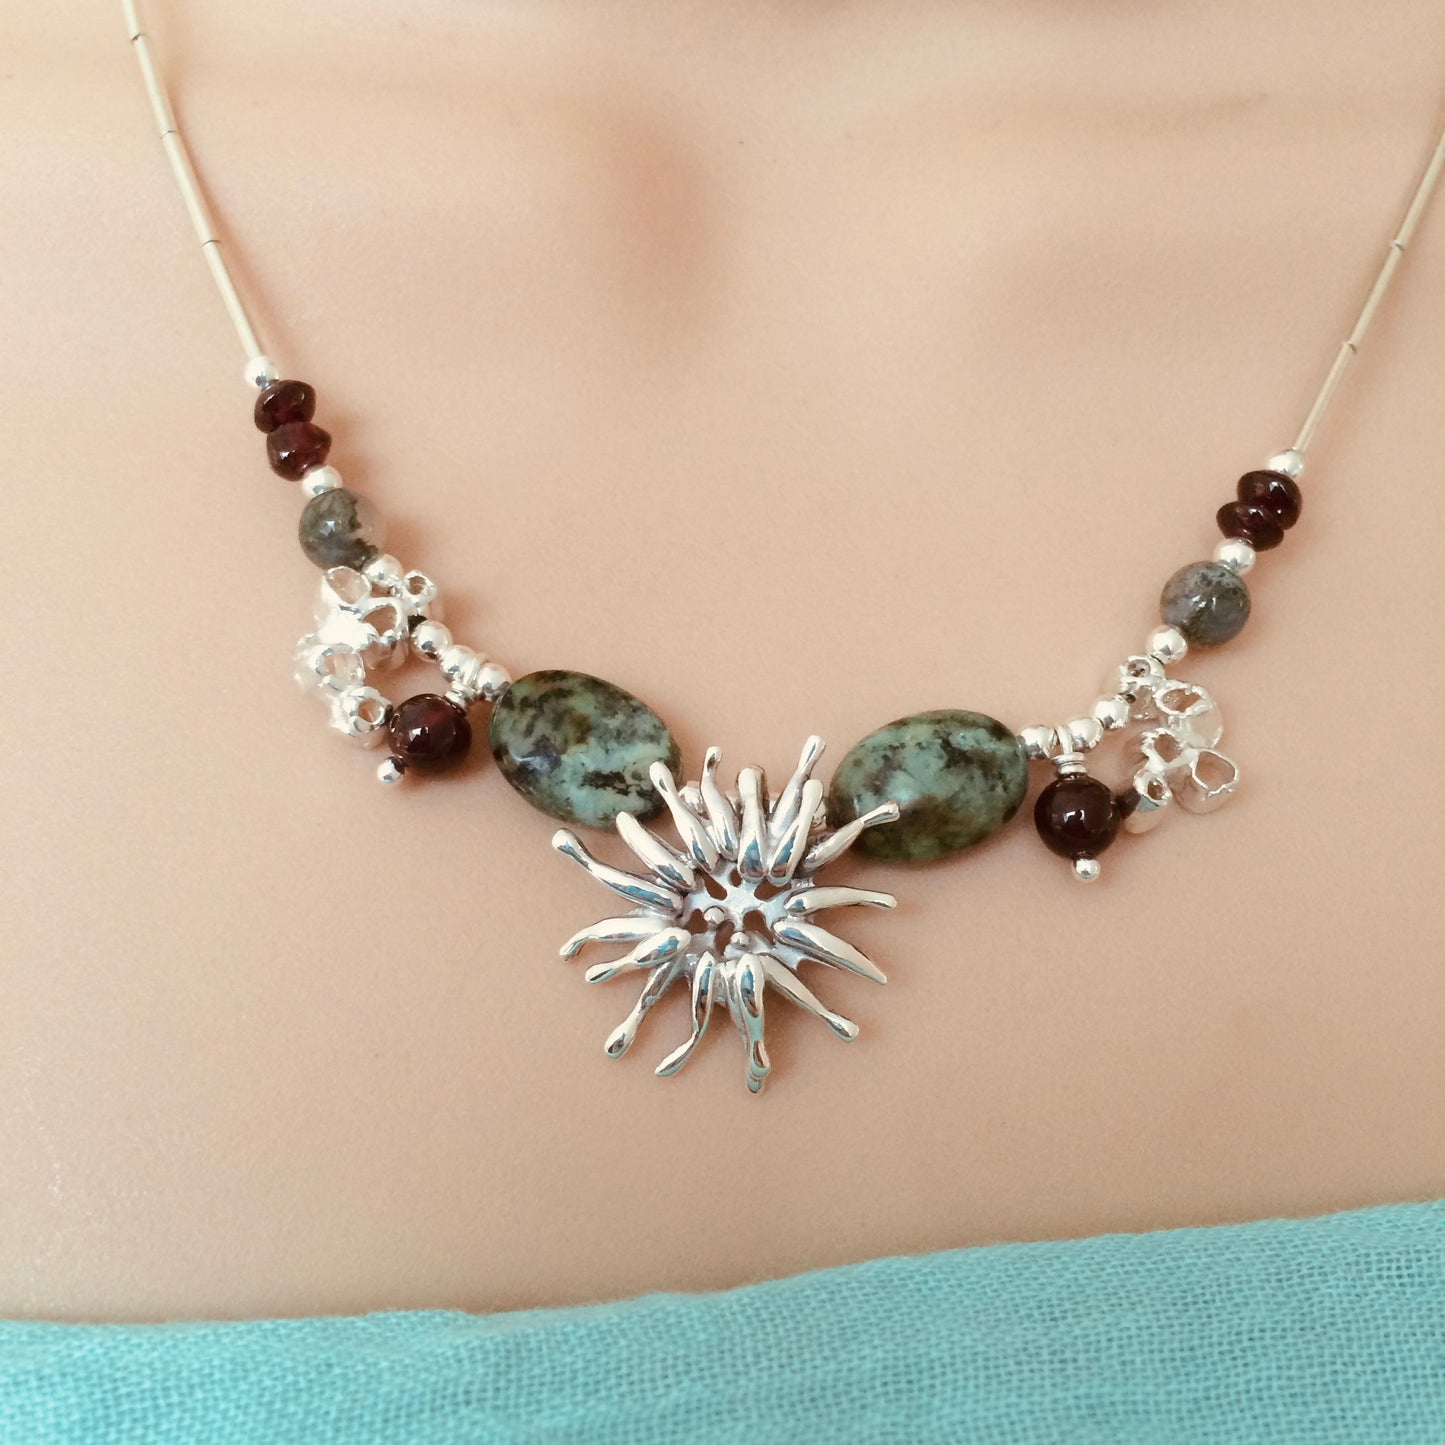 Sea anemone necklace with barnacles